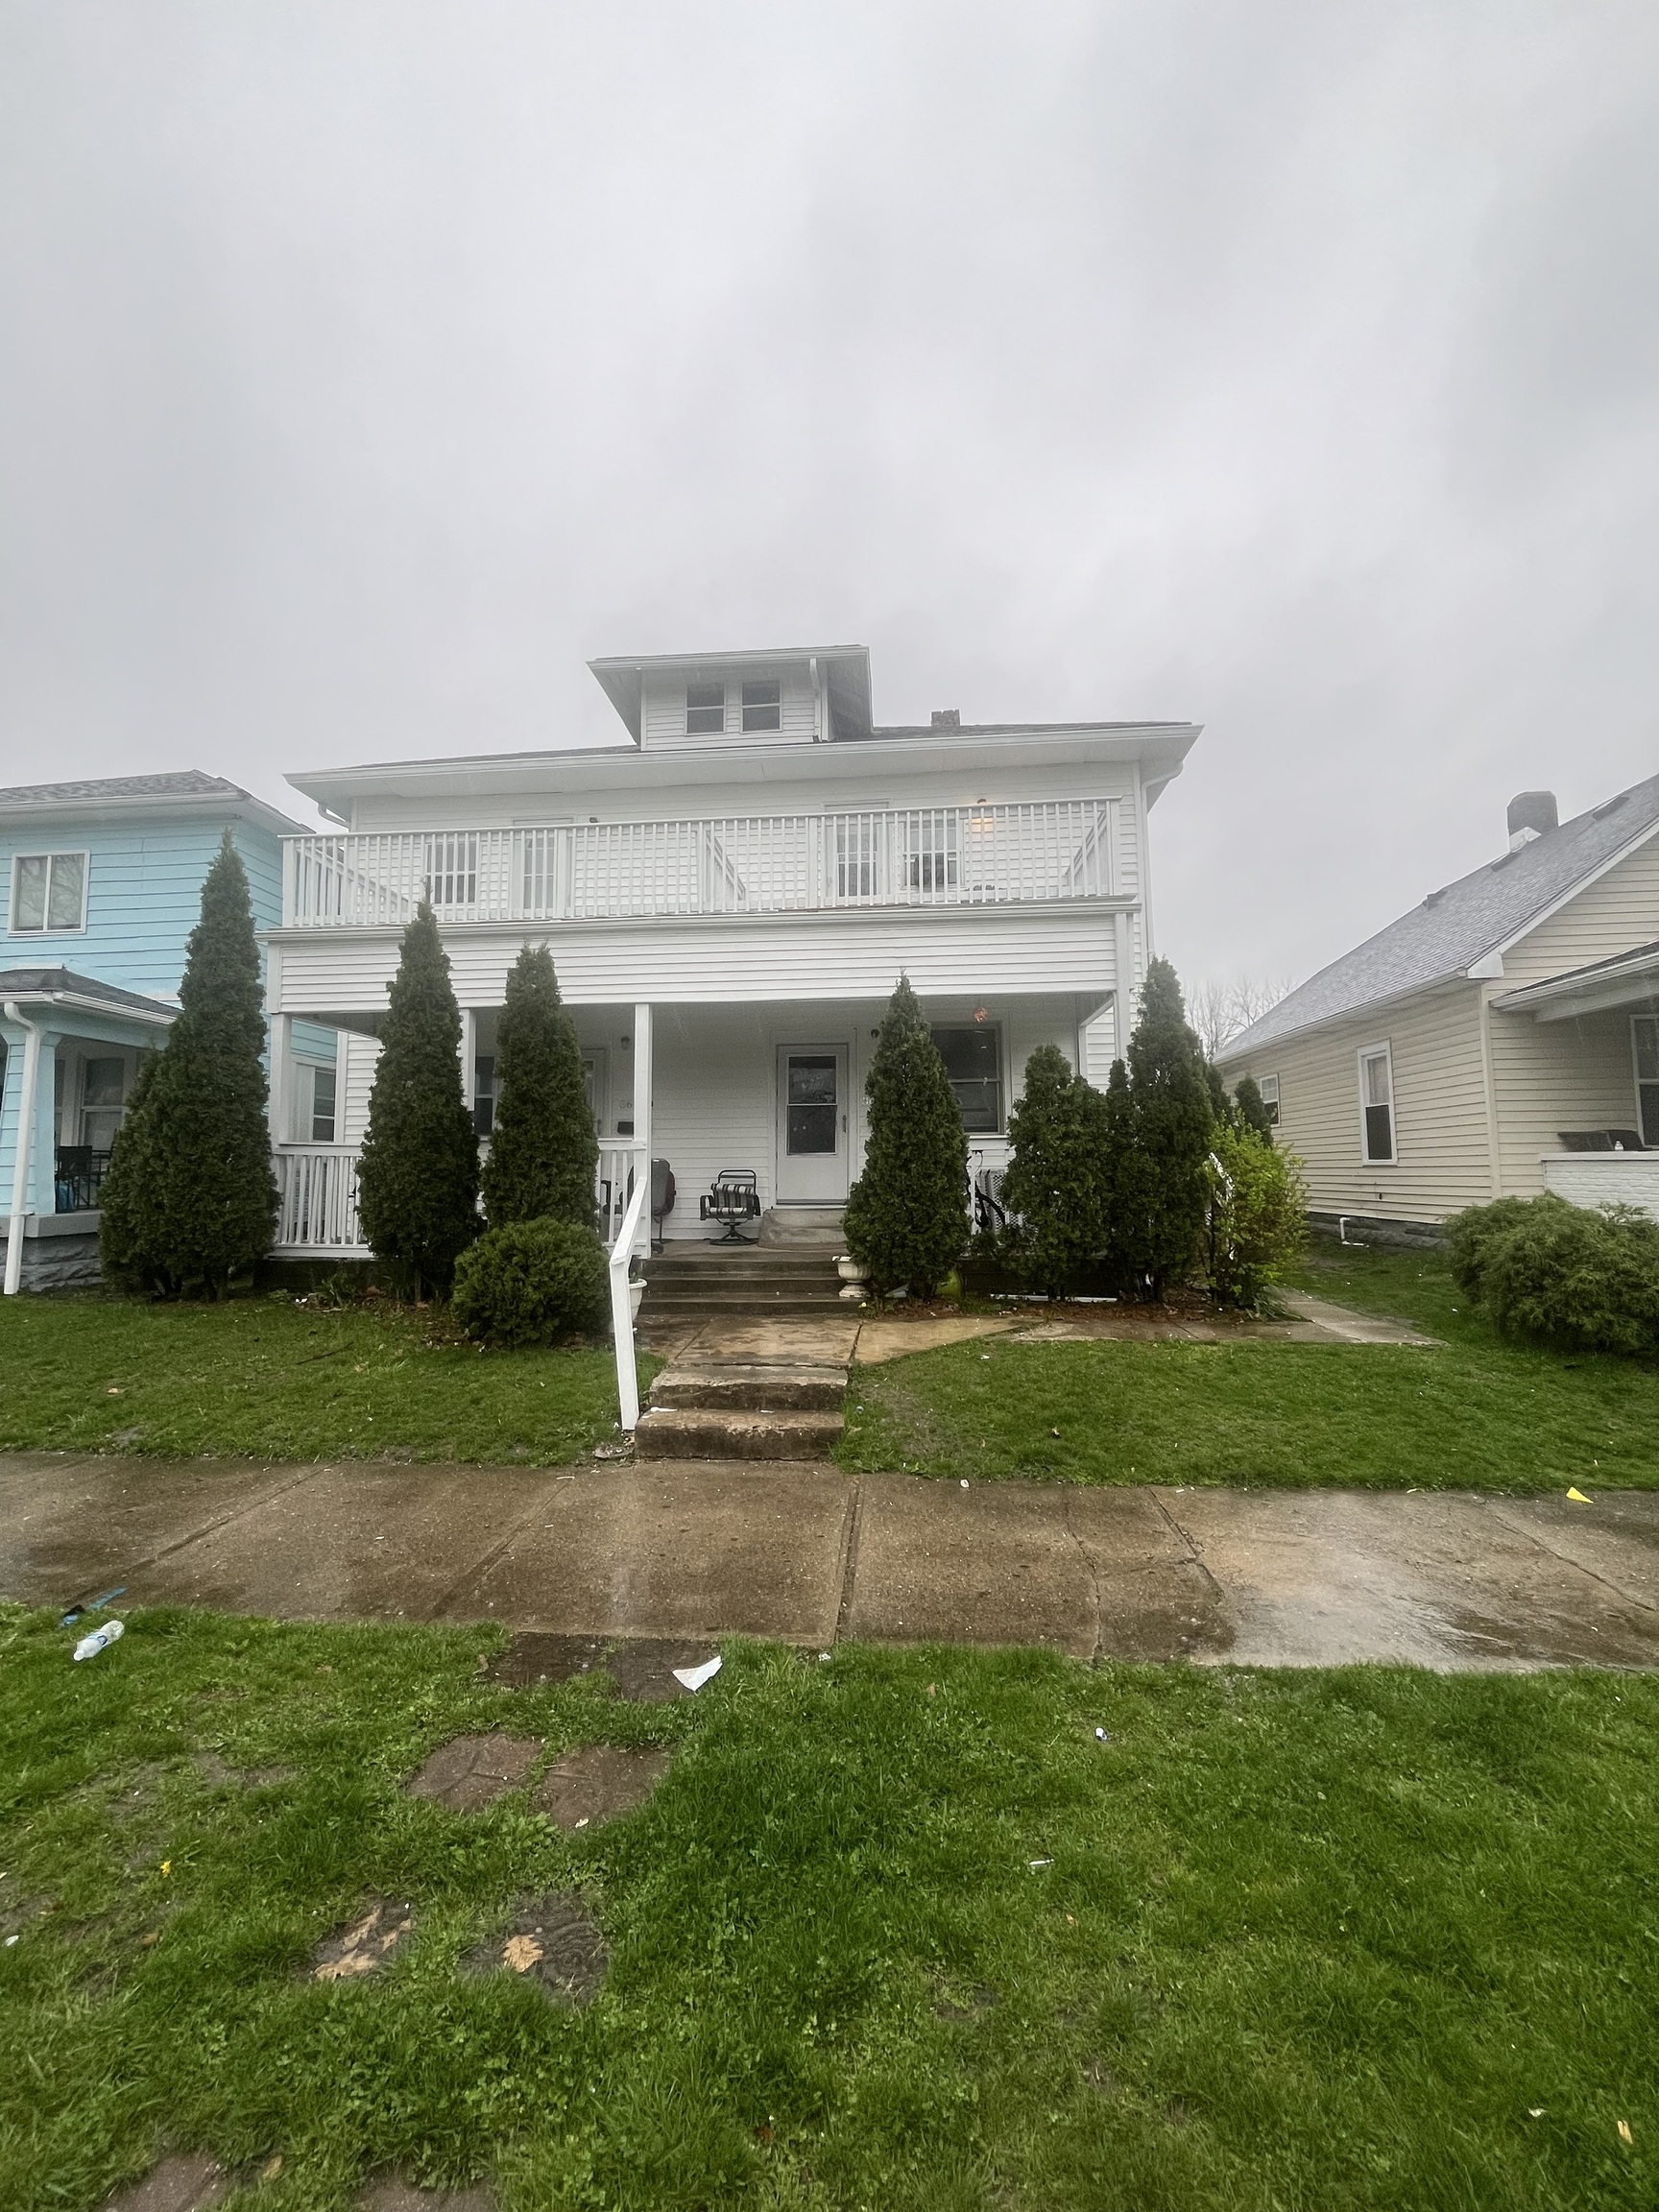 Photo of 3617 Unit A (Upper) Brookside Parkway South Drive, Indianapolis, IN 46201